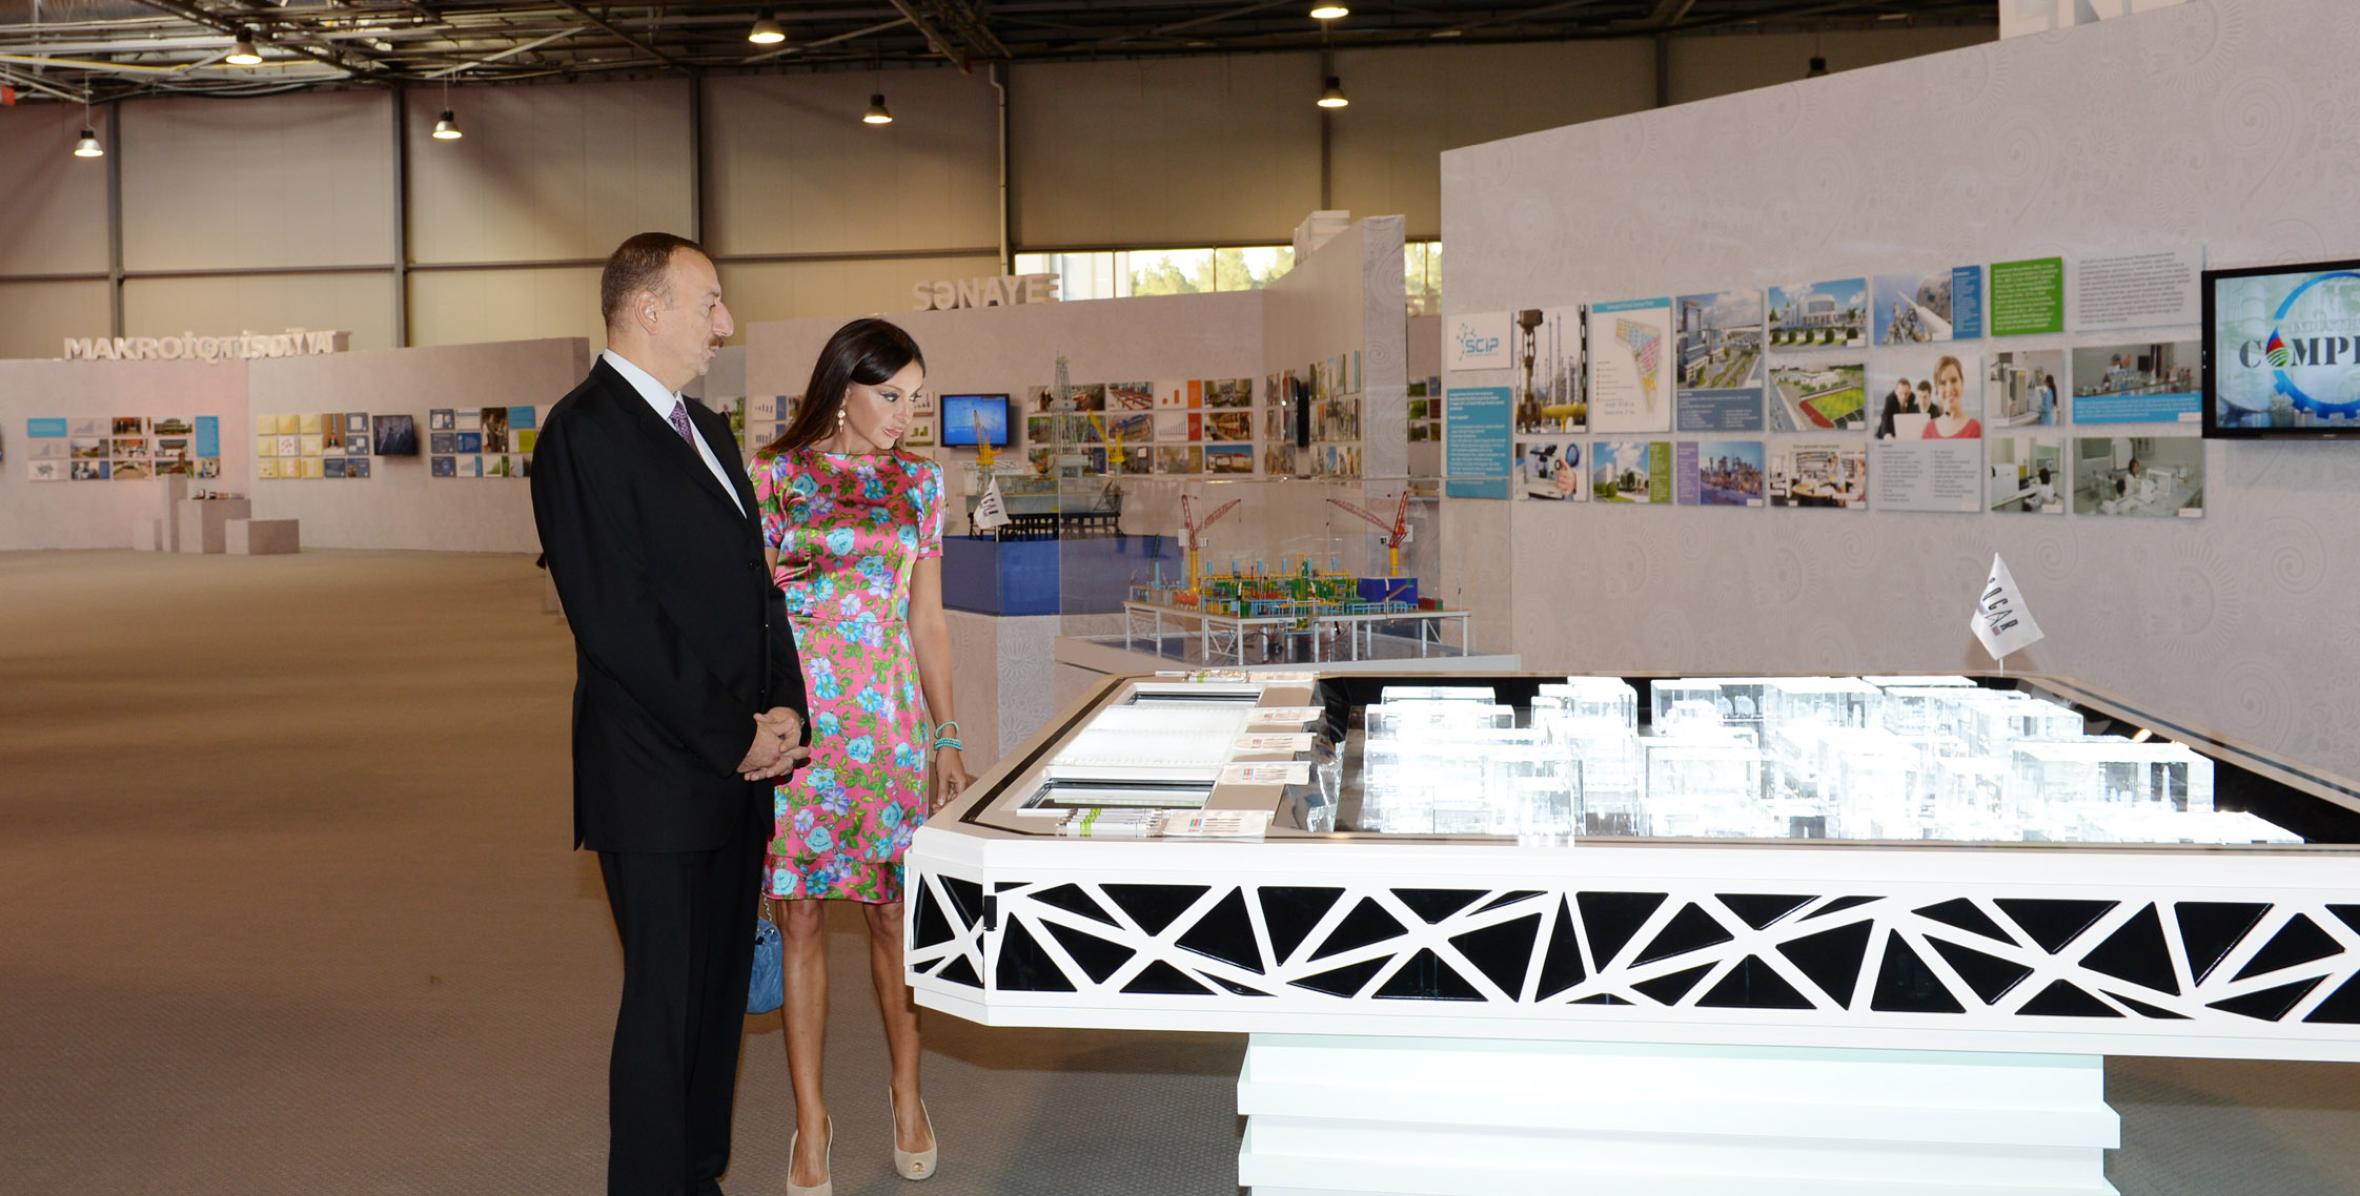 Ilham Aliyev reviewed the exhibition called "Azerbaijan over 10 years. Socioeconomic development: implementation of state programs"